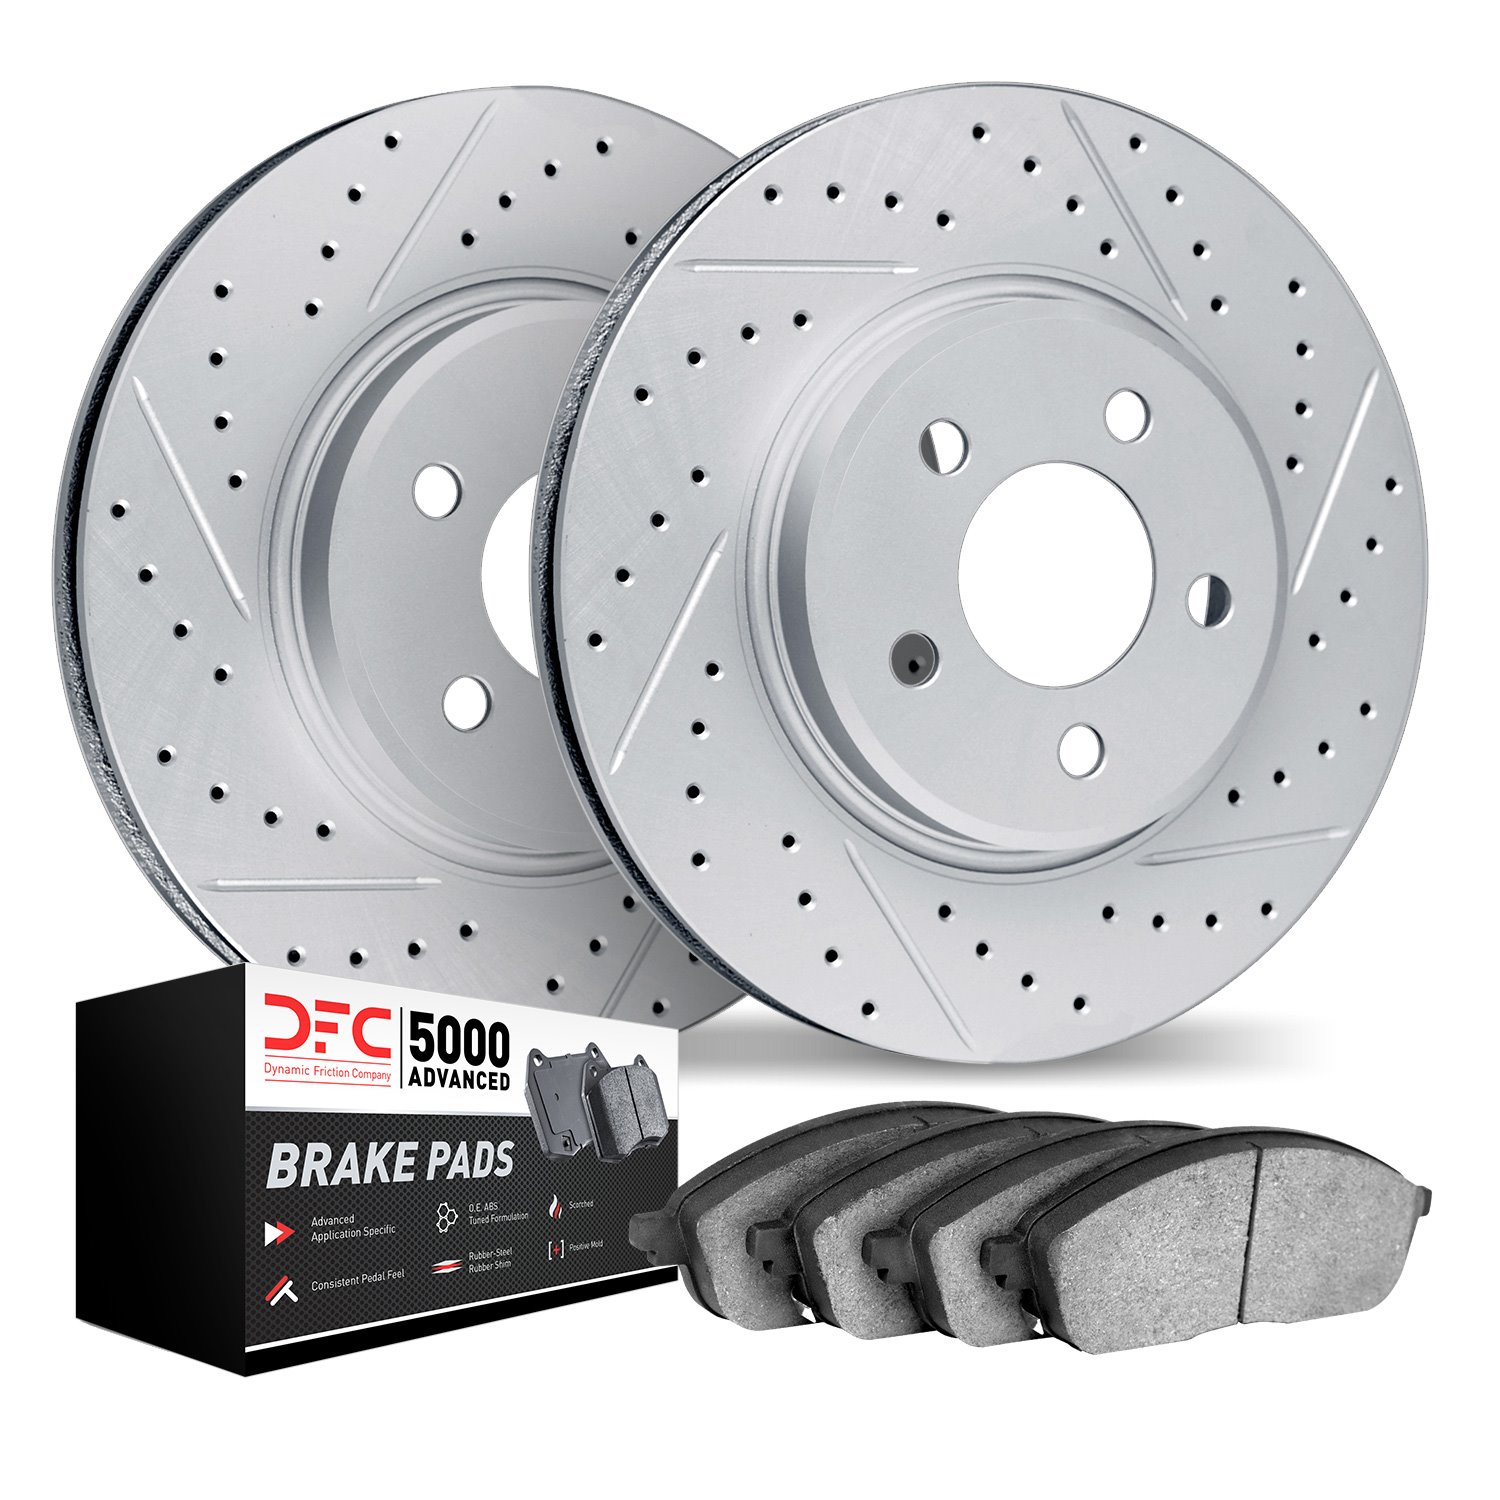 2502-73017 Geoperformance Drilled/Slotted Rotors w/5000 Advanced Brake Pads Kit, 2001-2003 Audi/Volkswagen, Position: Front